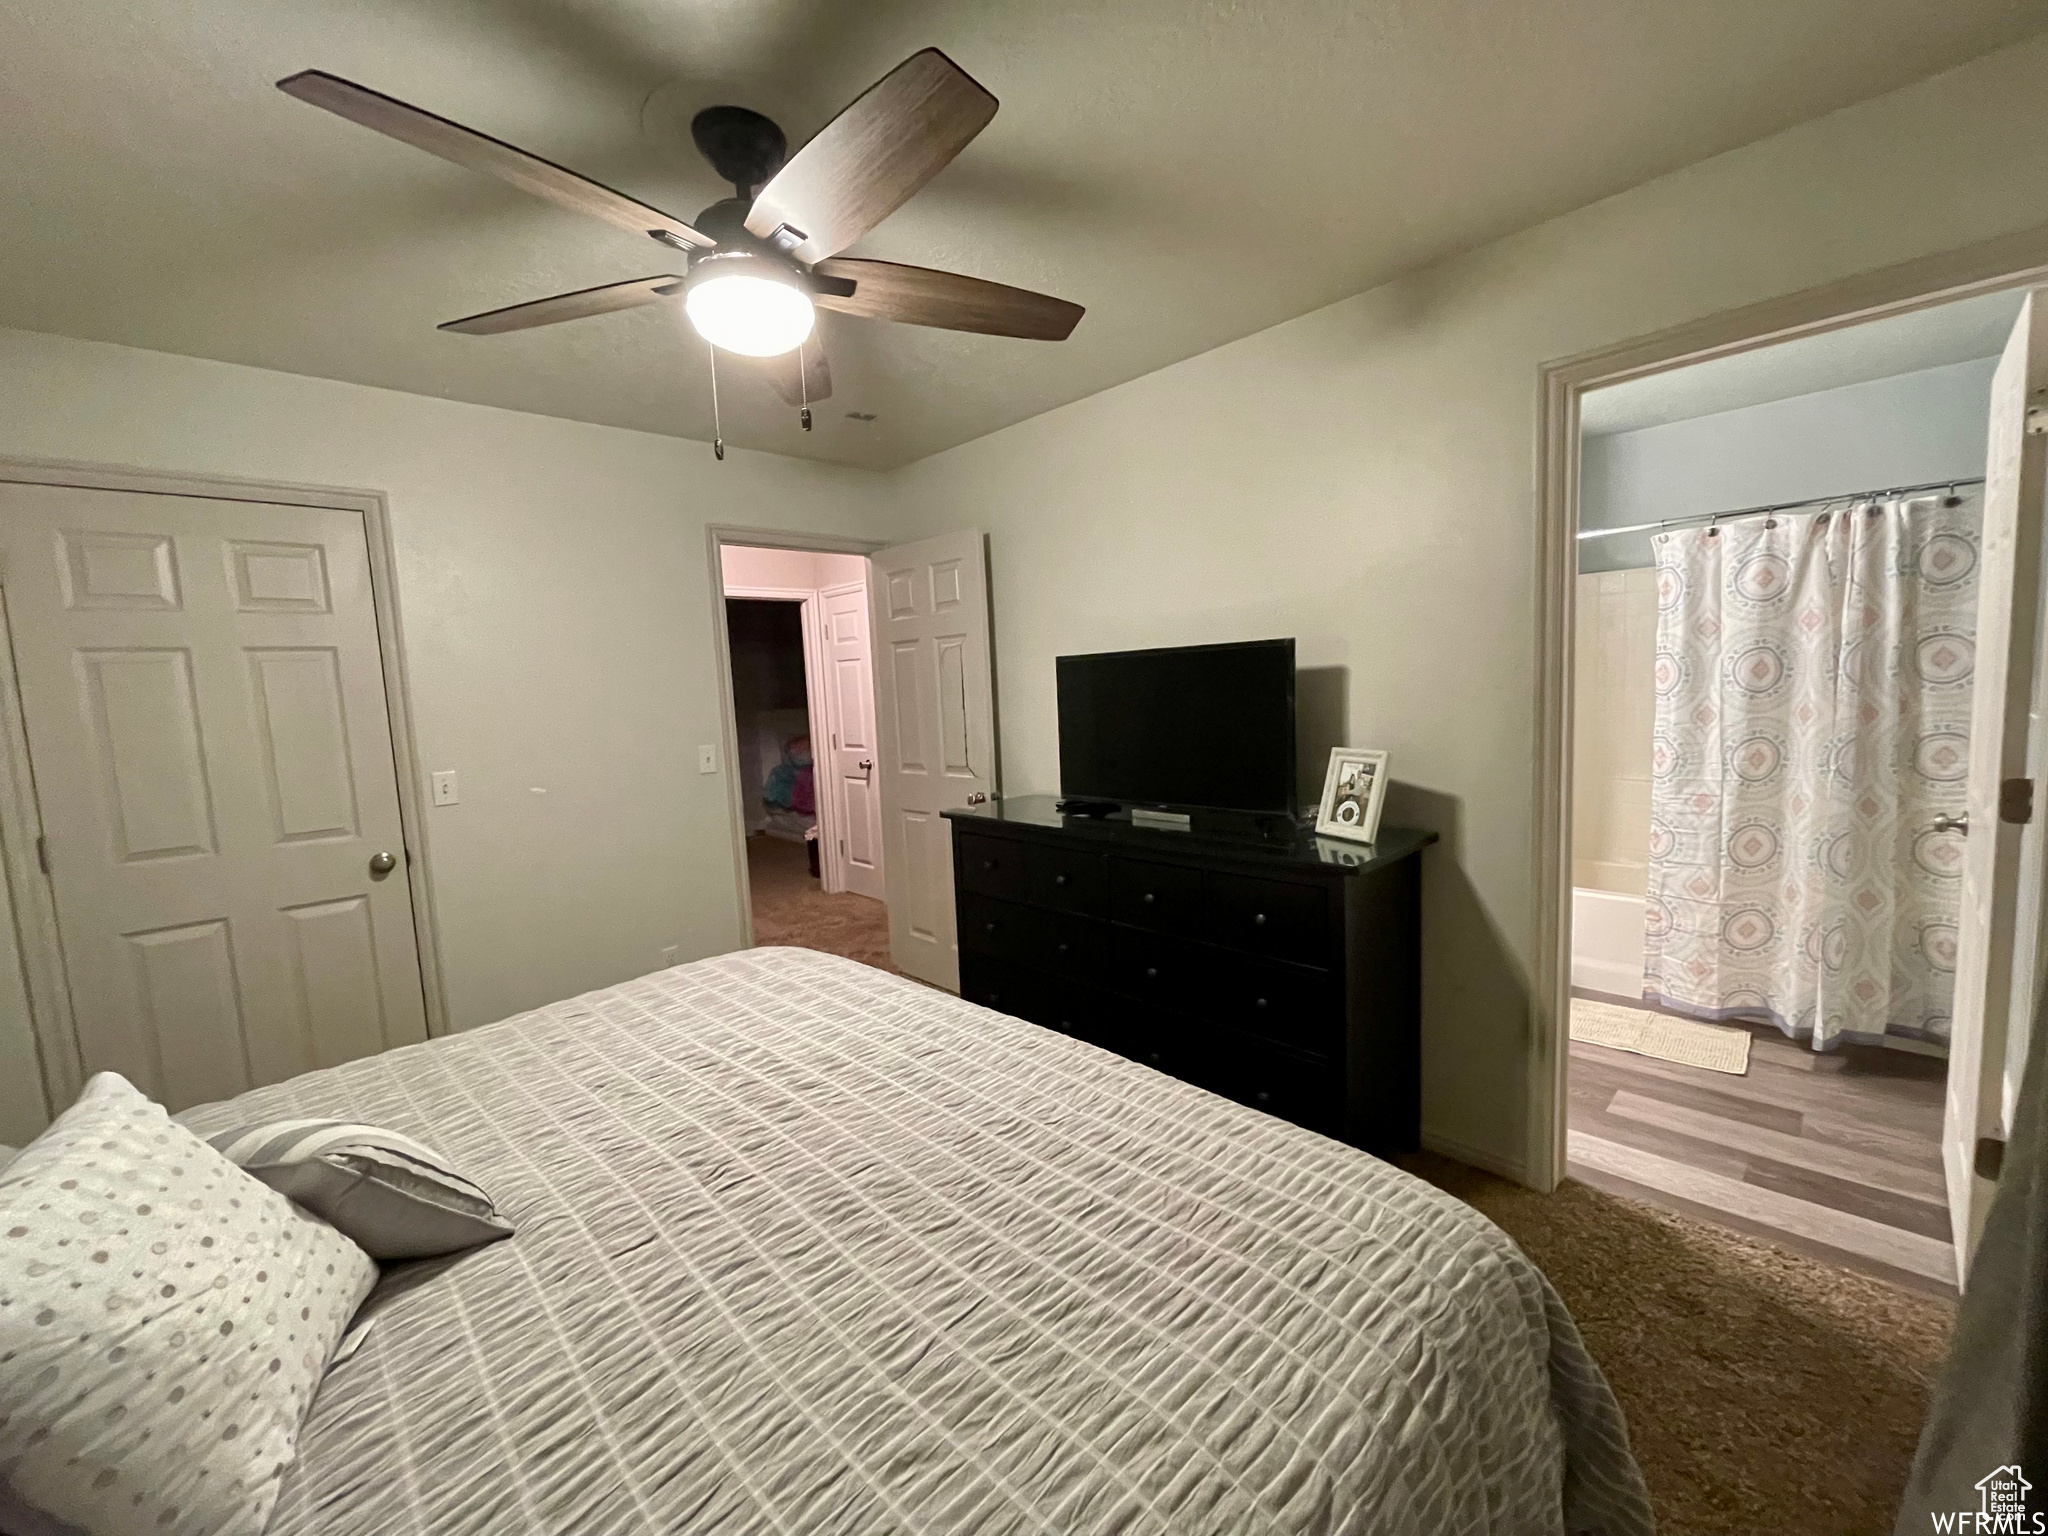 Carpeted bedroom with connected bathroom, a closet, and ceiling fan